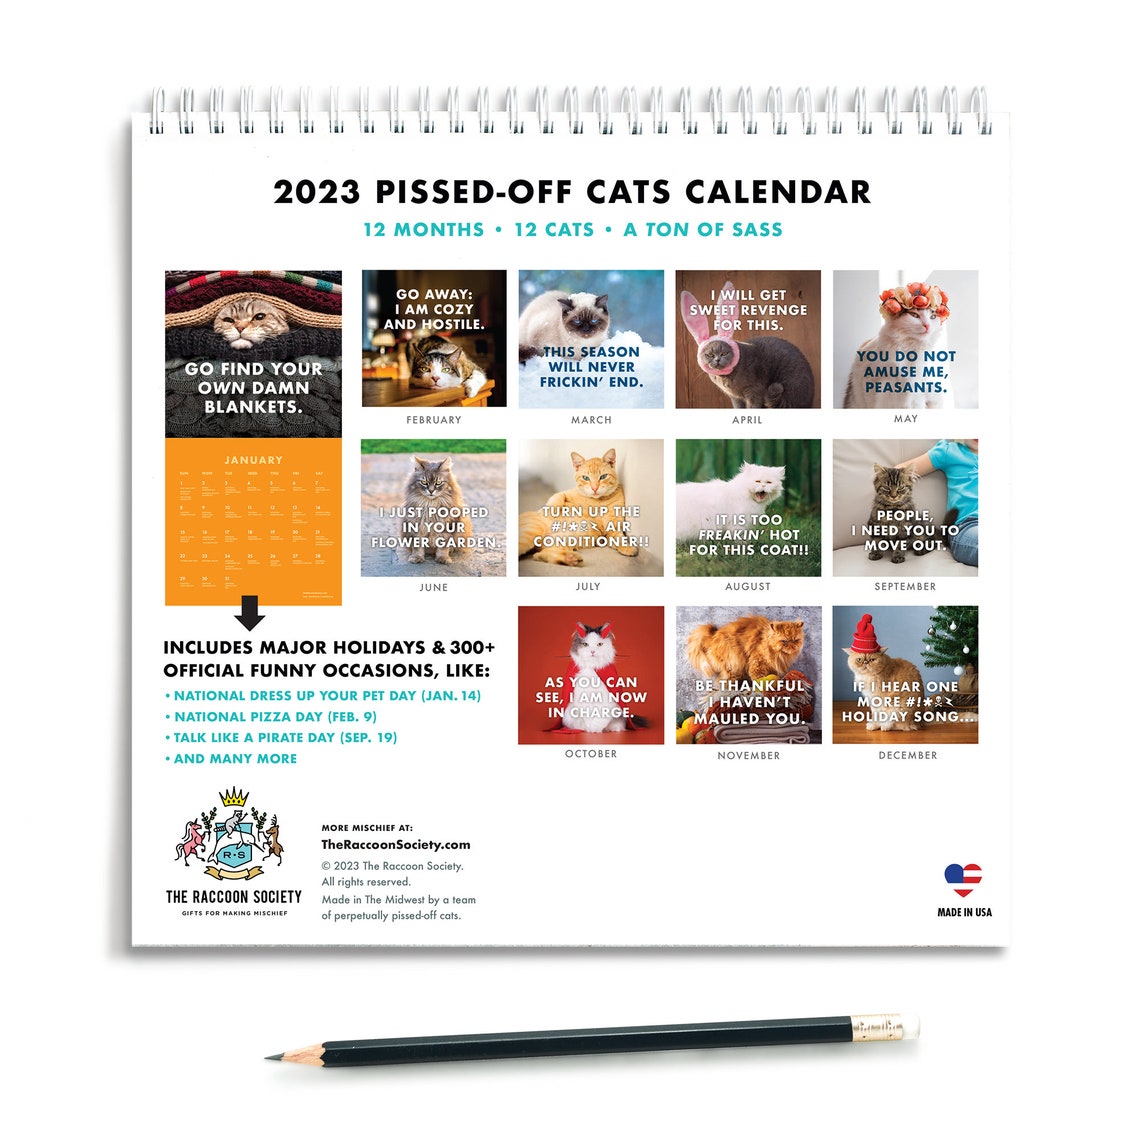 2023-pissed-off-cats-calendrier-dr-le-de-chat-calendrier-etsy-canada